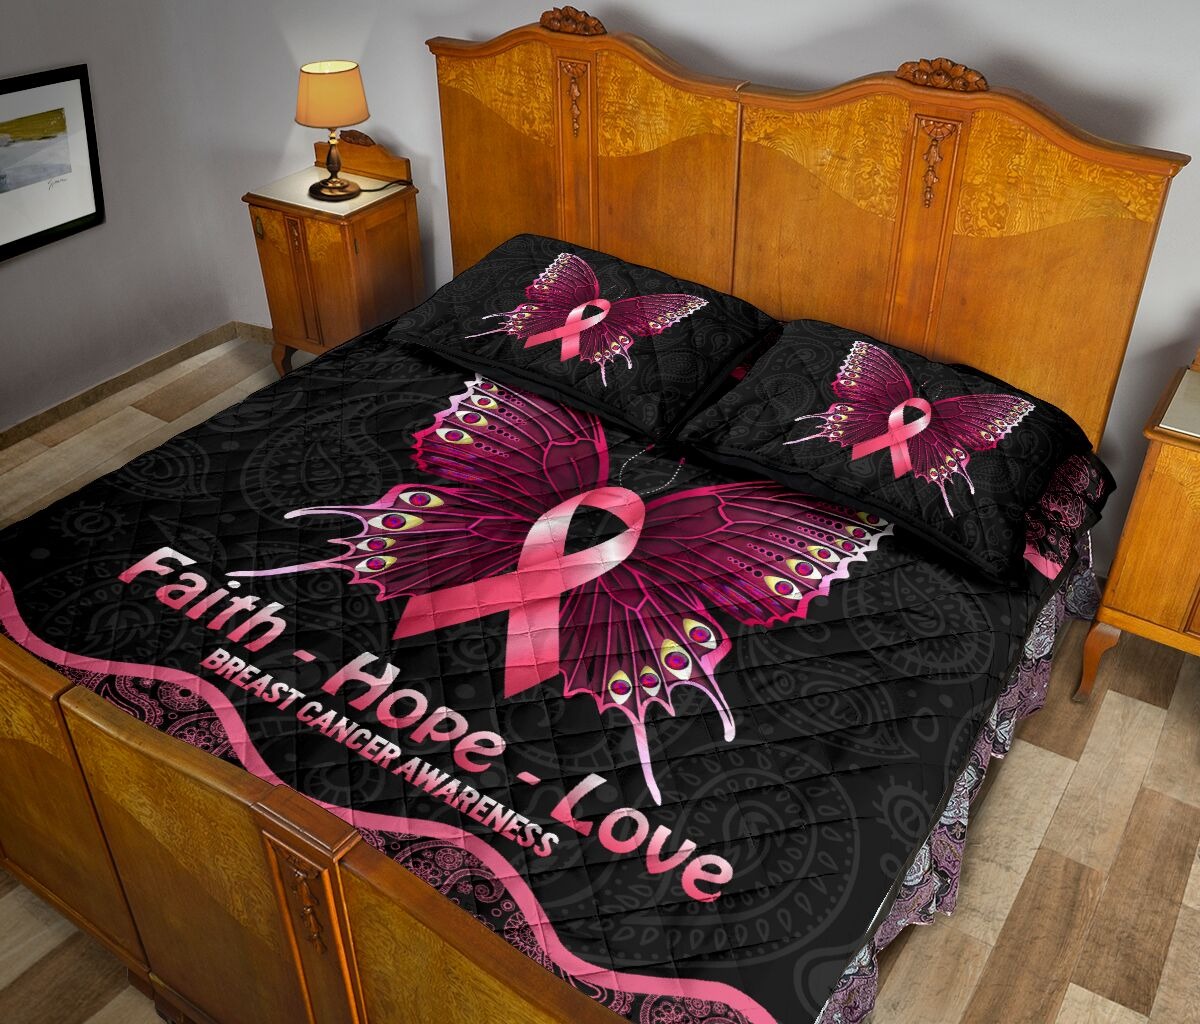 Butterfly faith hope love breast cancer awareness quilt bedding set3